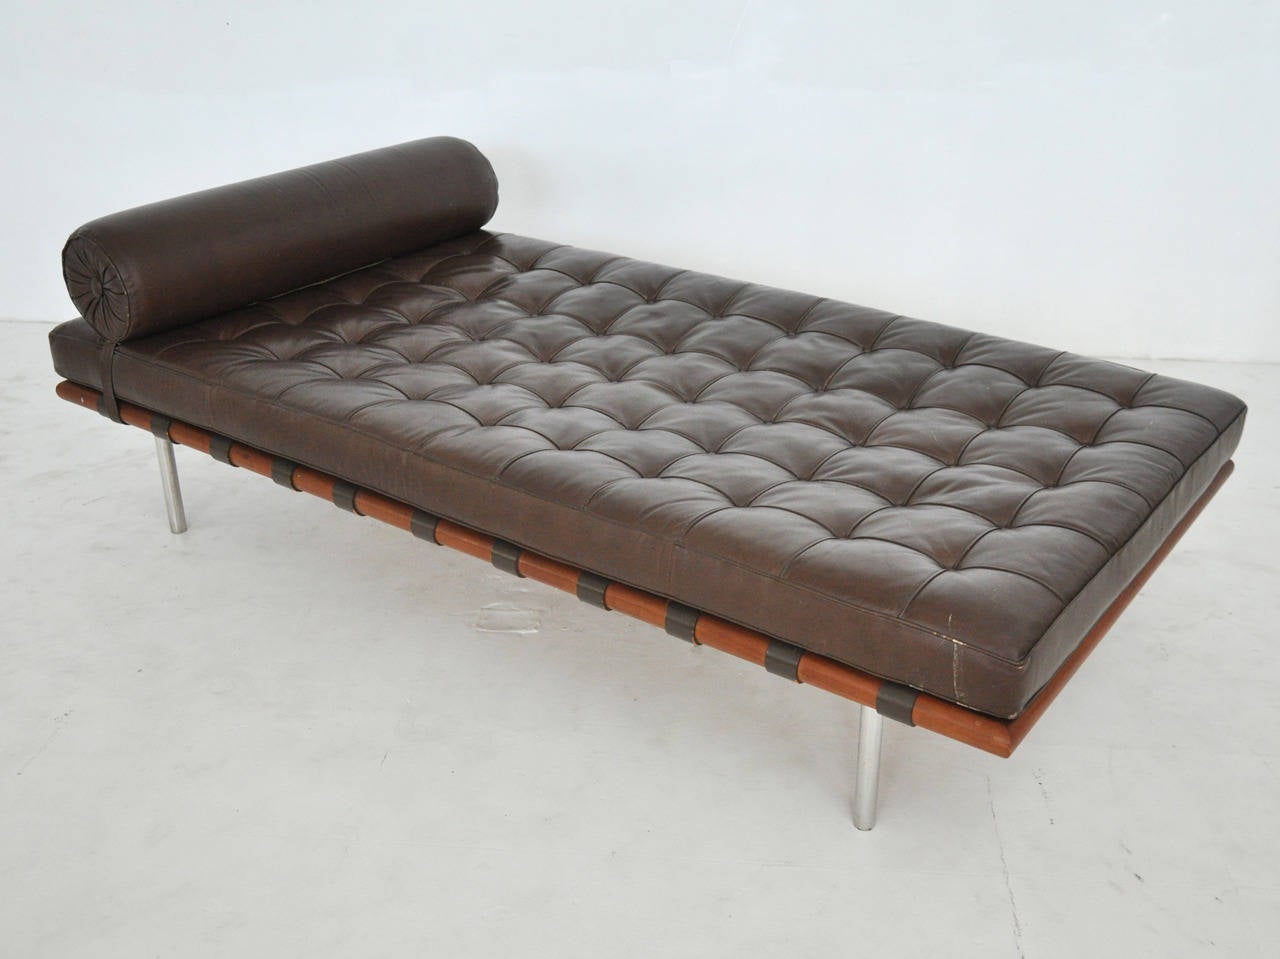 Barcelona daybed by Mies van der Rohe for Knoll. Original brown leather in excellent condition with walnut frame. Knoll labels, circa 1970s.